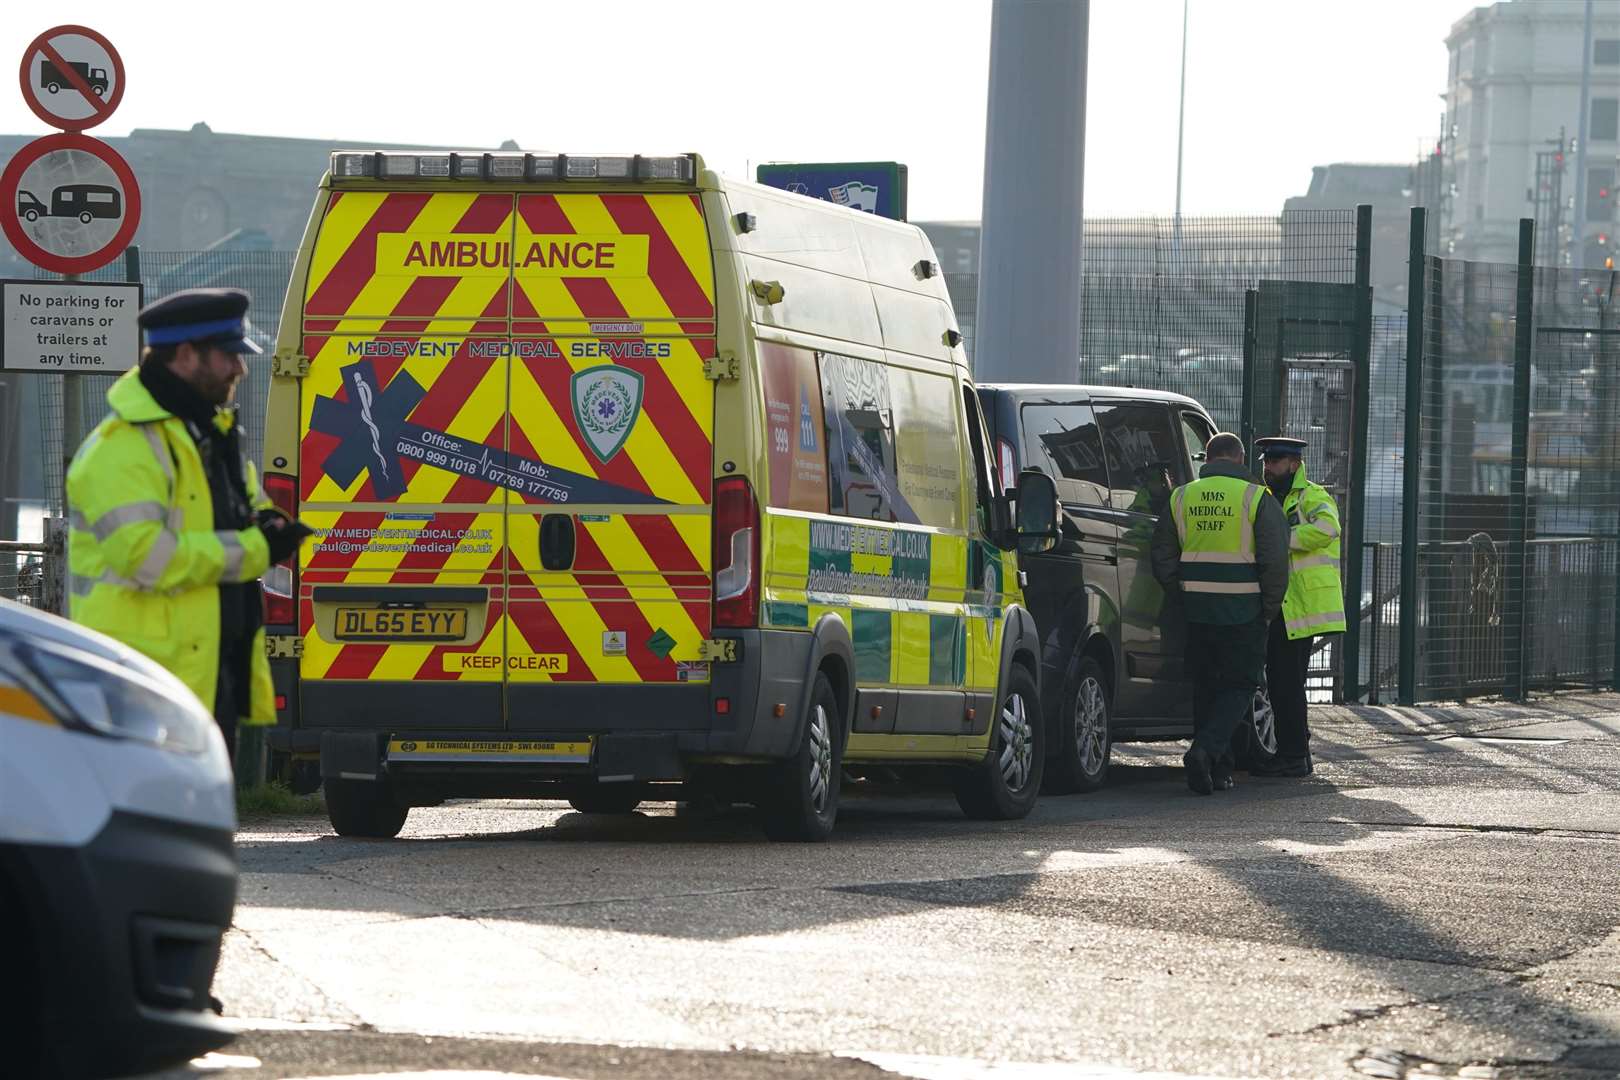 An ambulance arrives at the Port of Dover after the incident in the Channel (Gareth Fuller/PA)